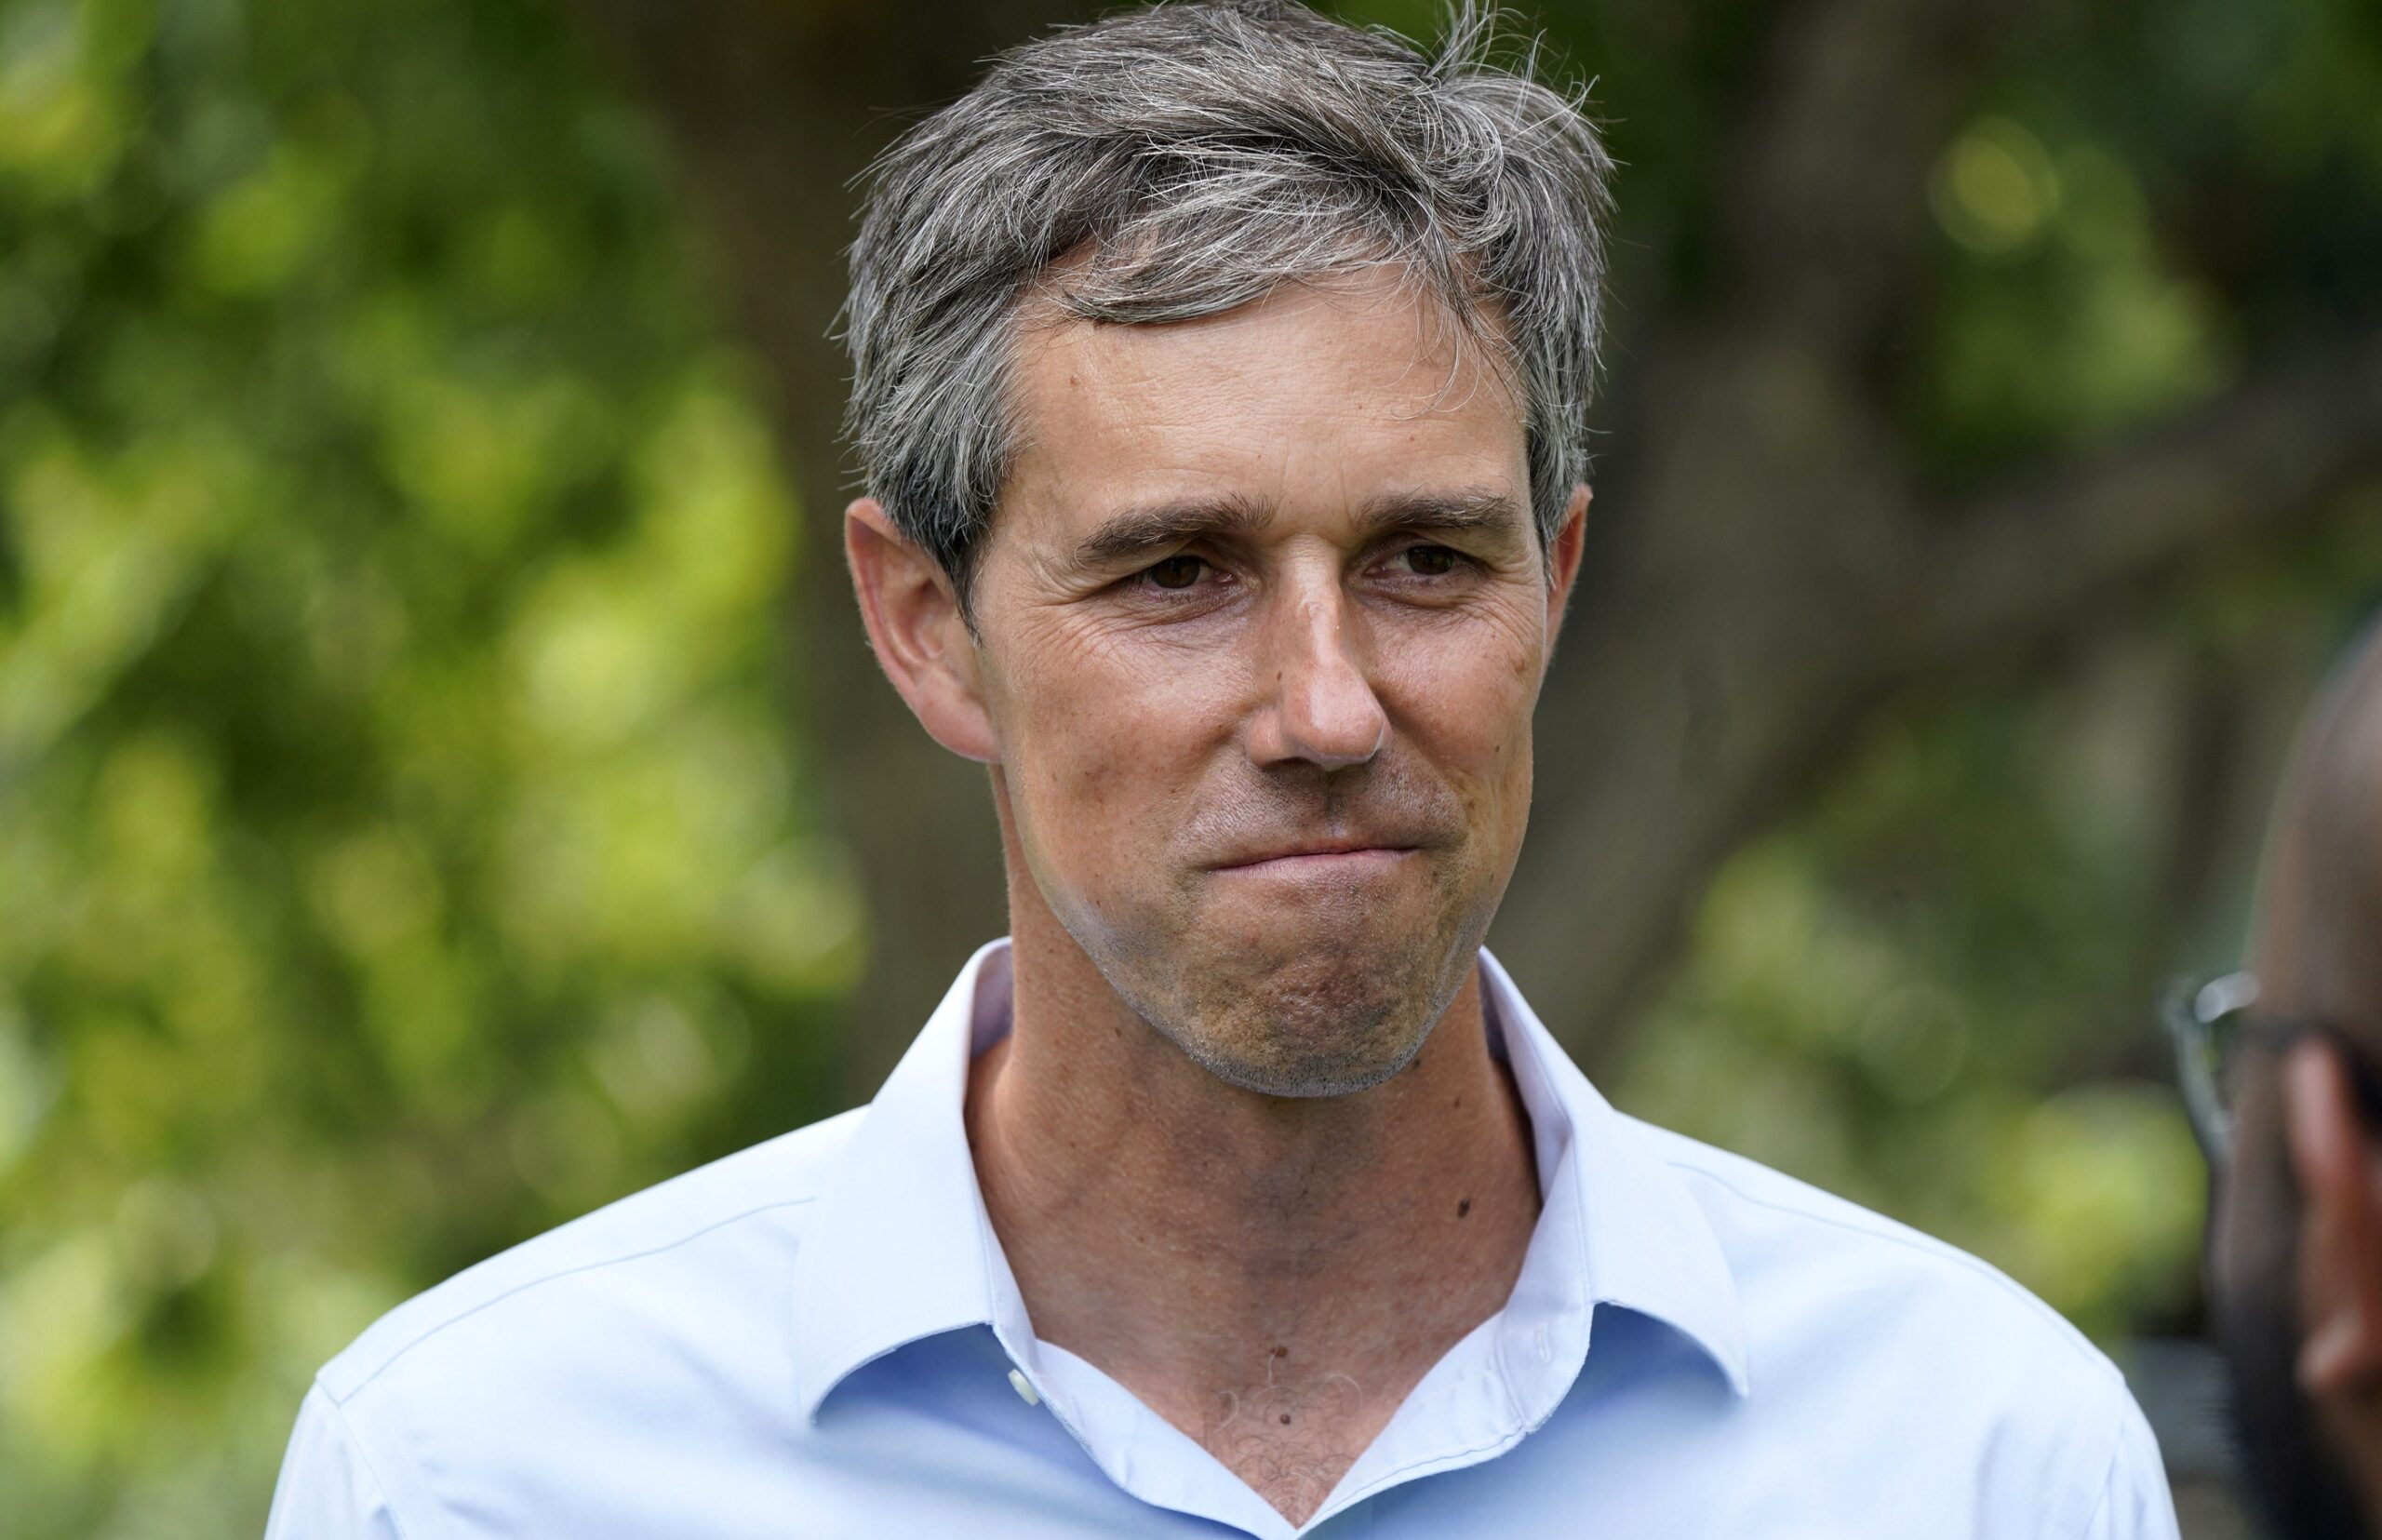 Beto O’Rourke enters race for Texas governor Courthouse News Service